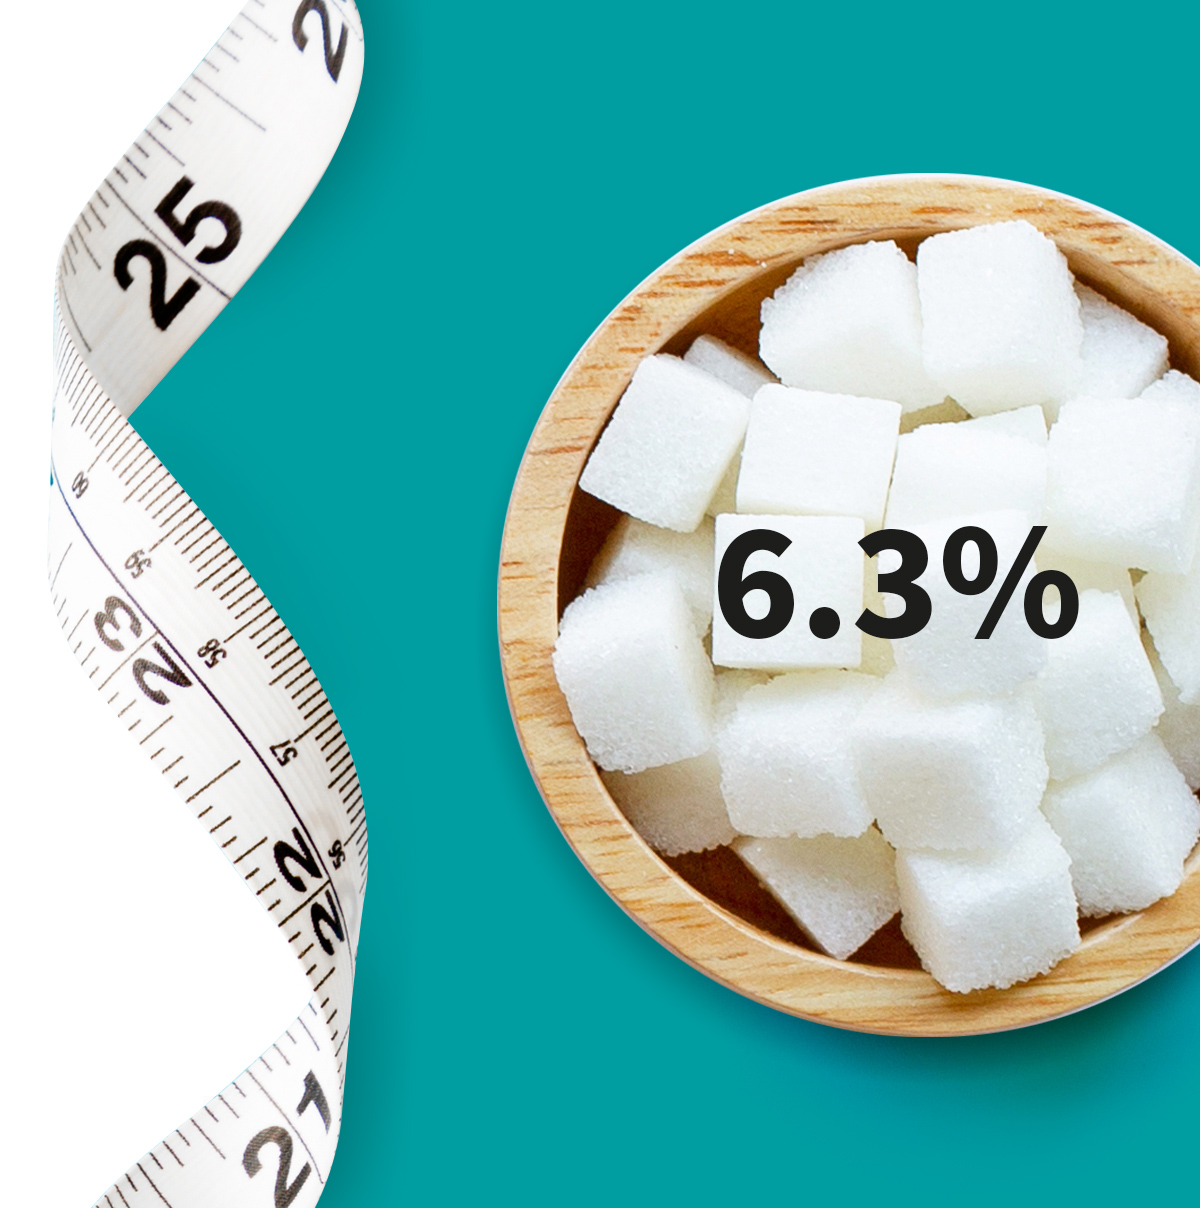 [.NL-nl Netherlands (dutch)] A measuring tape and a bowl full of sugar cubes shown as a metaphor for diabetes